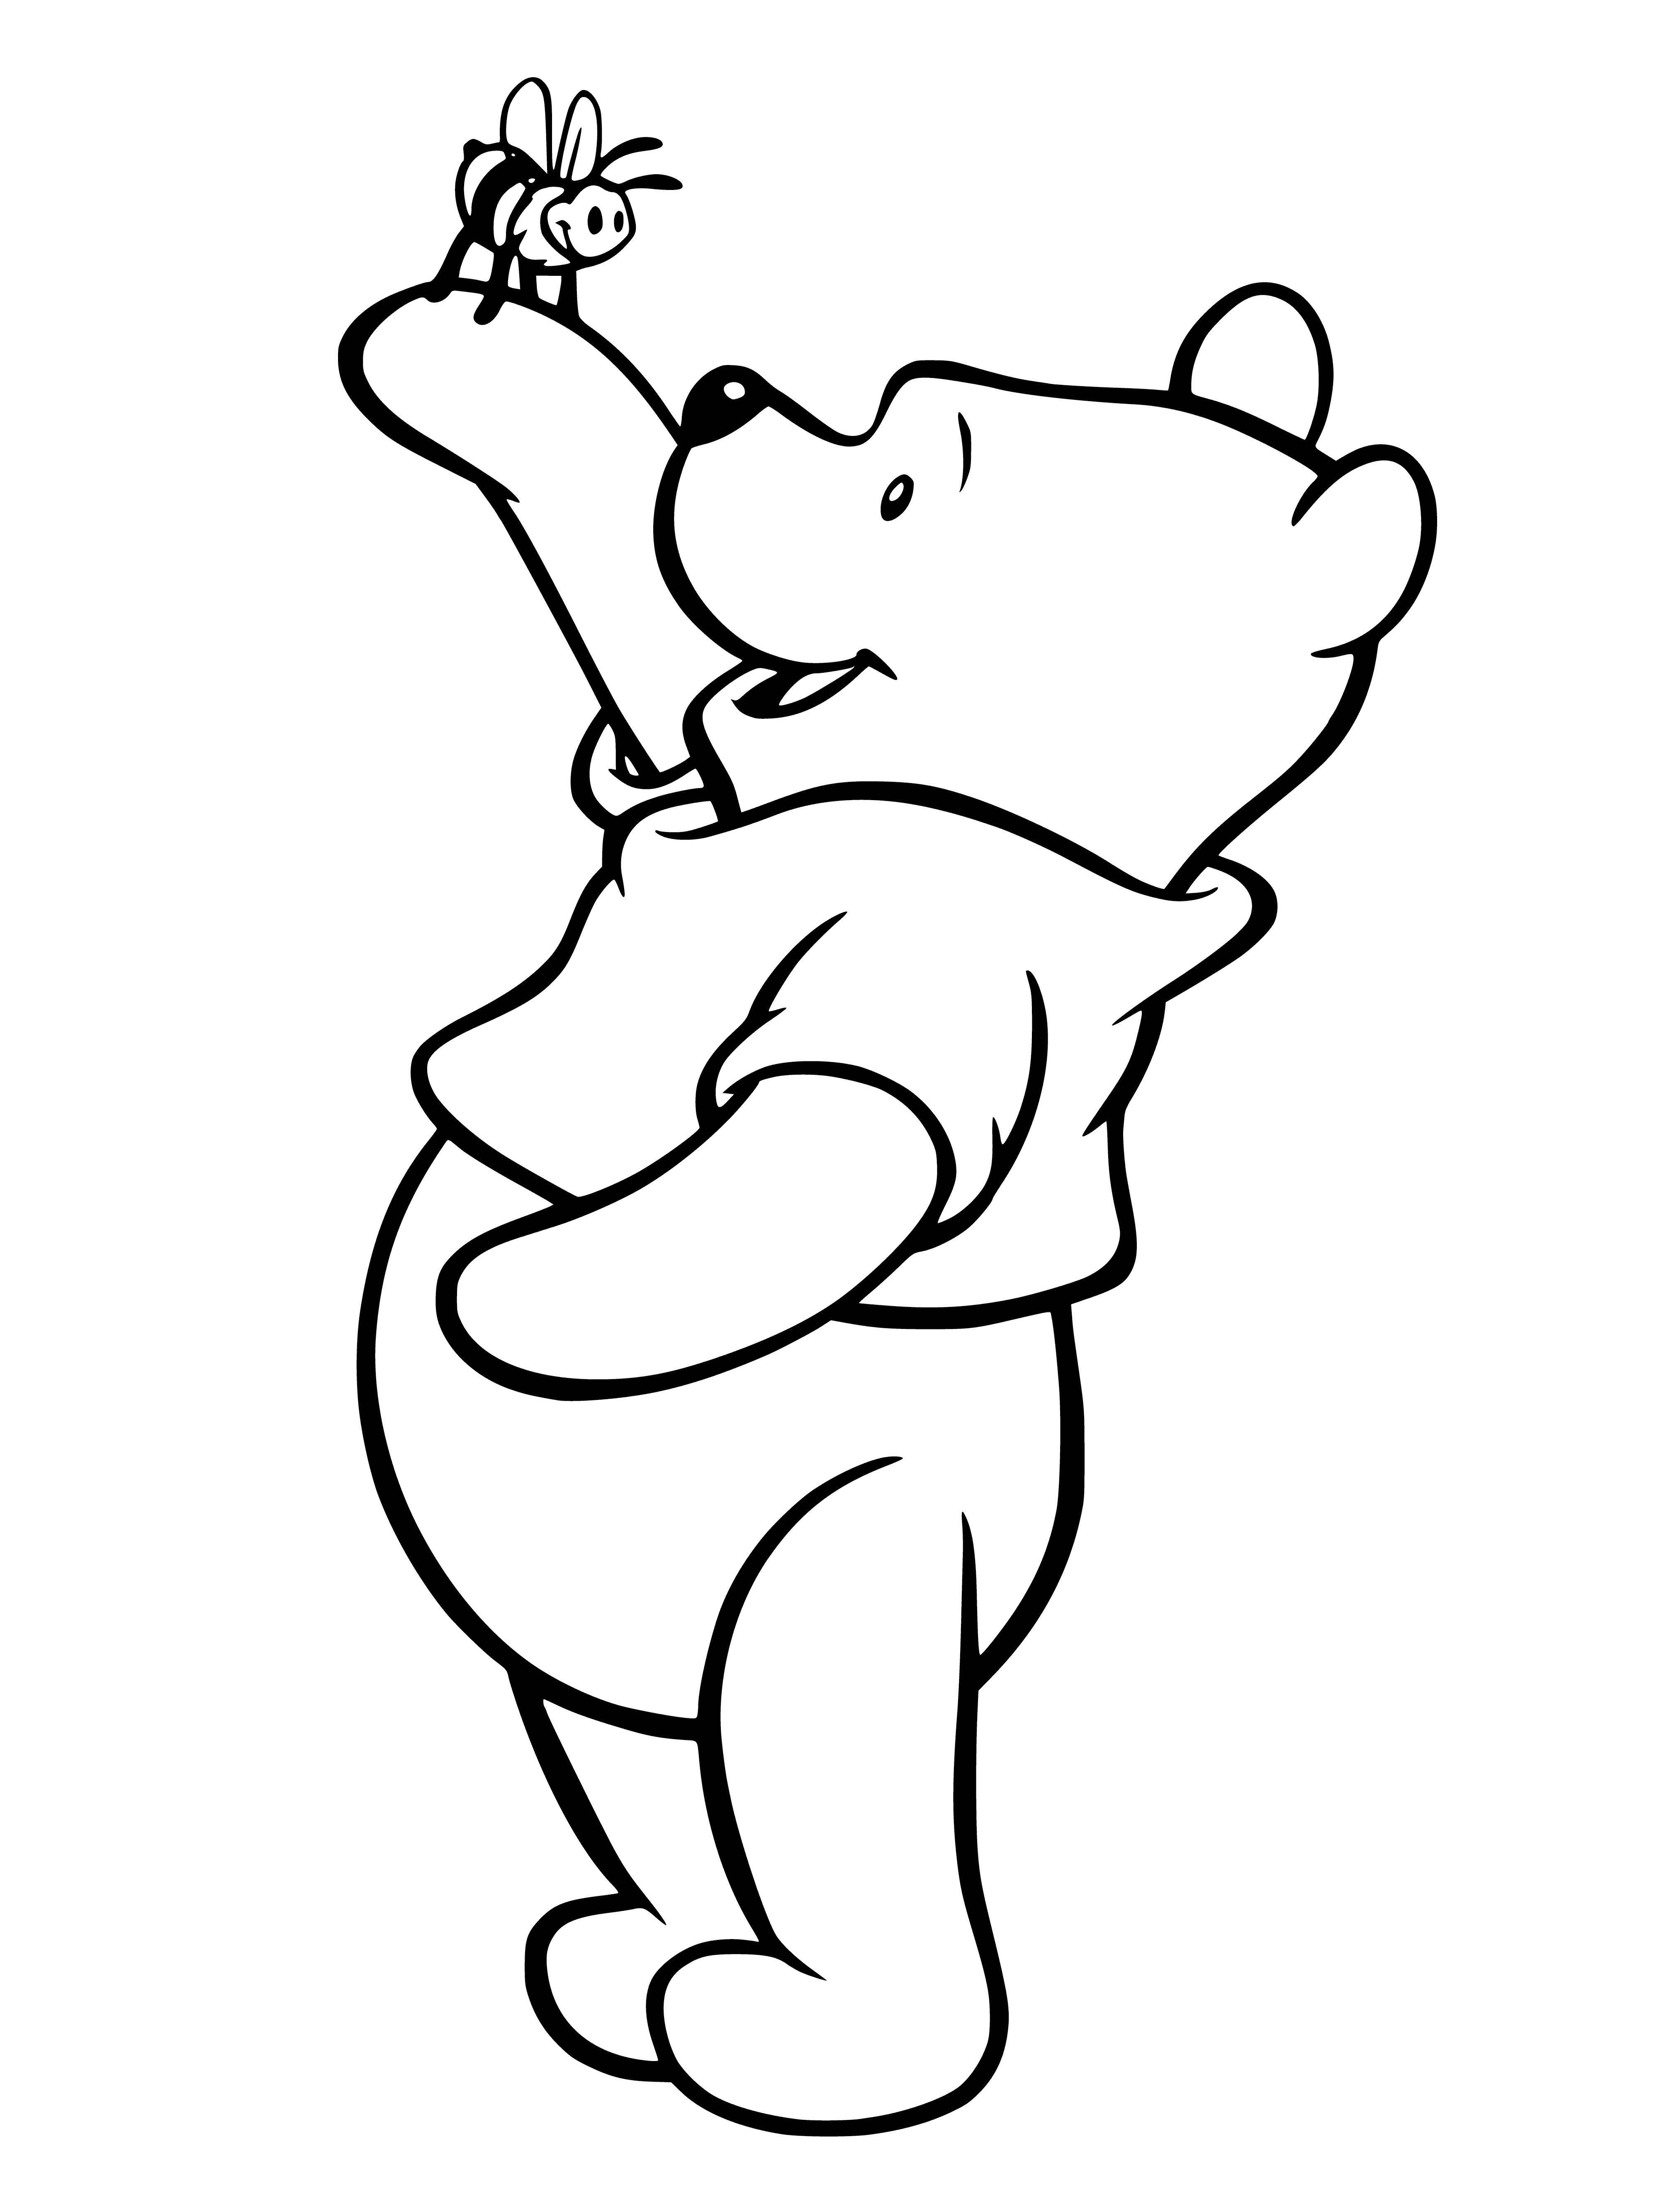 coloring page: Winnie the Pooh watches a bee buzzing around a flower near a tree, honey pot nearby.